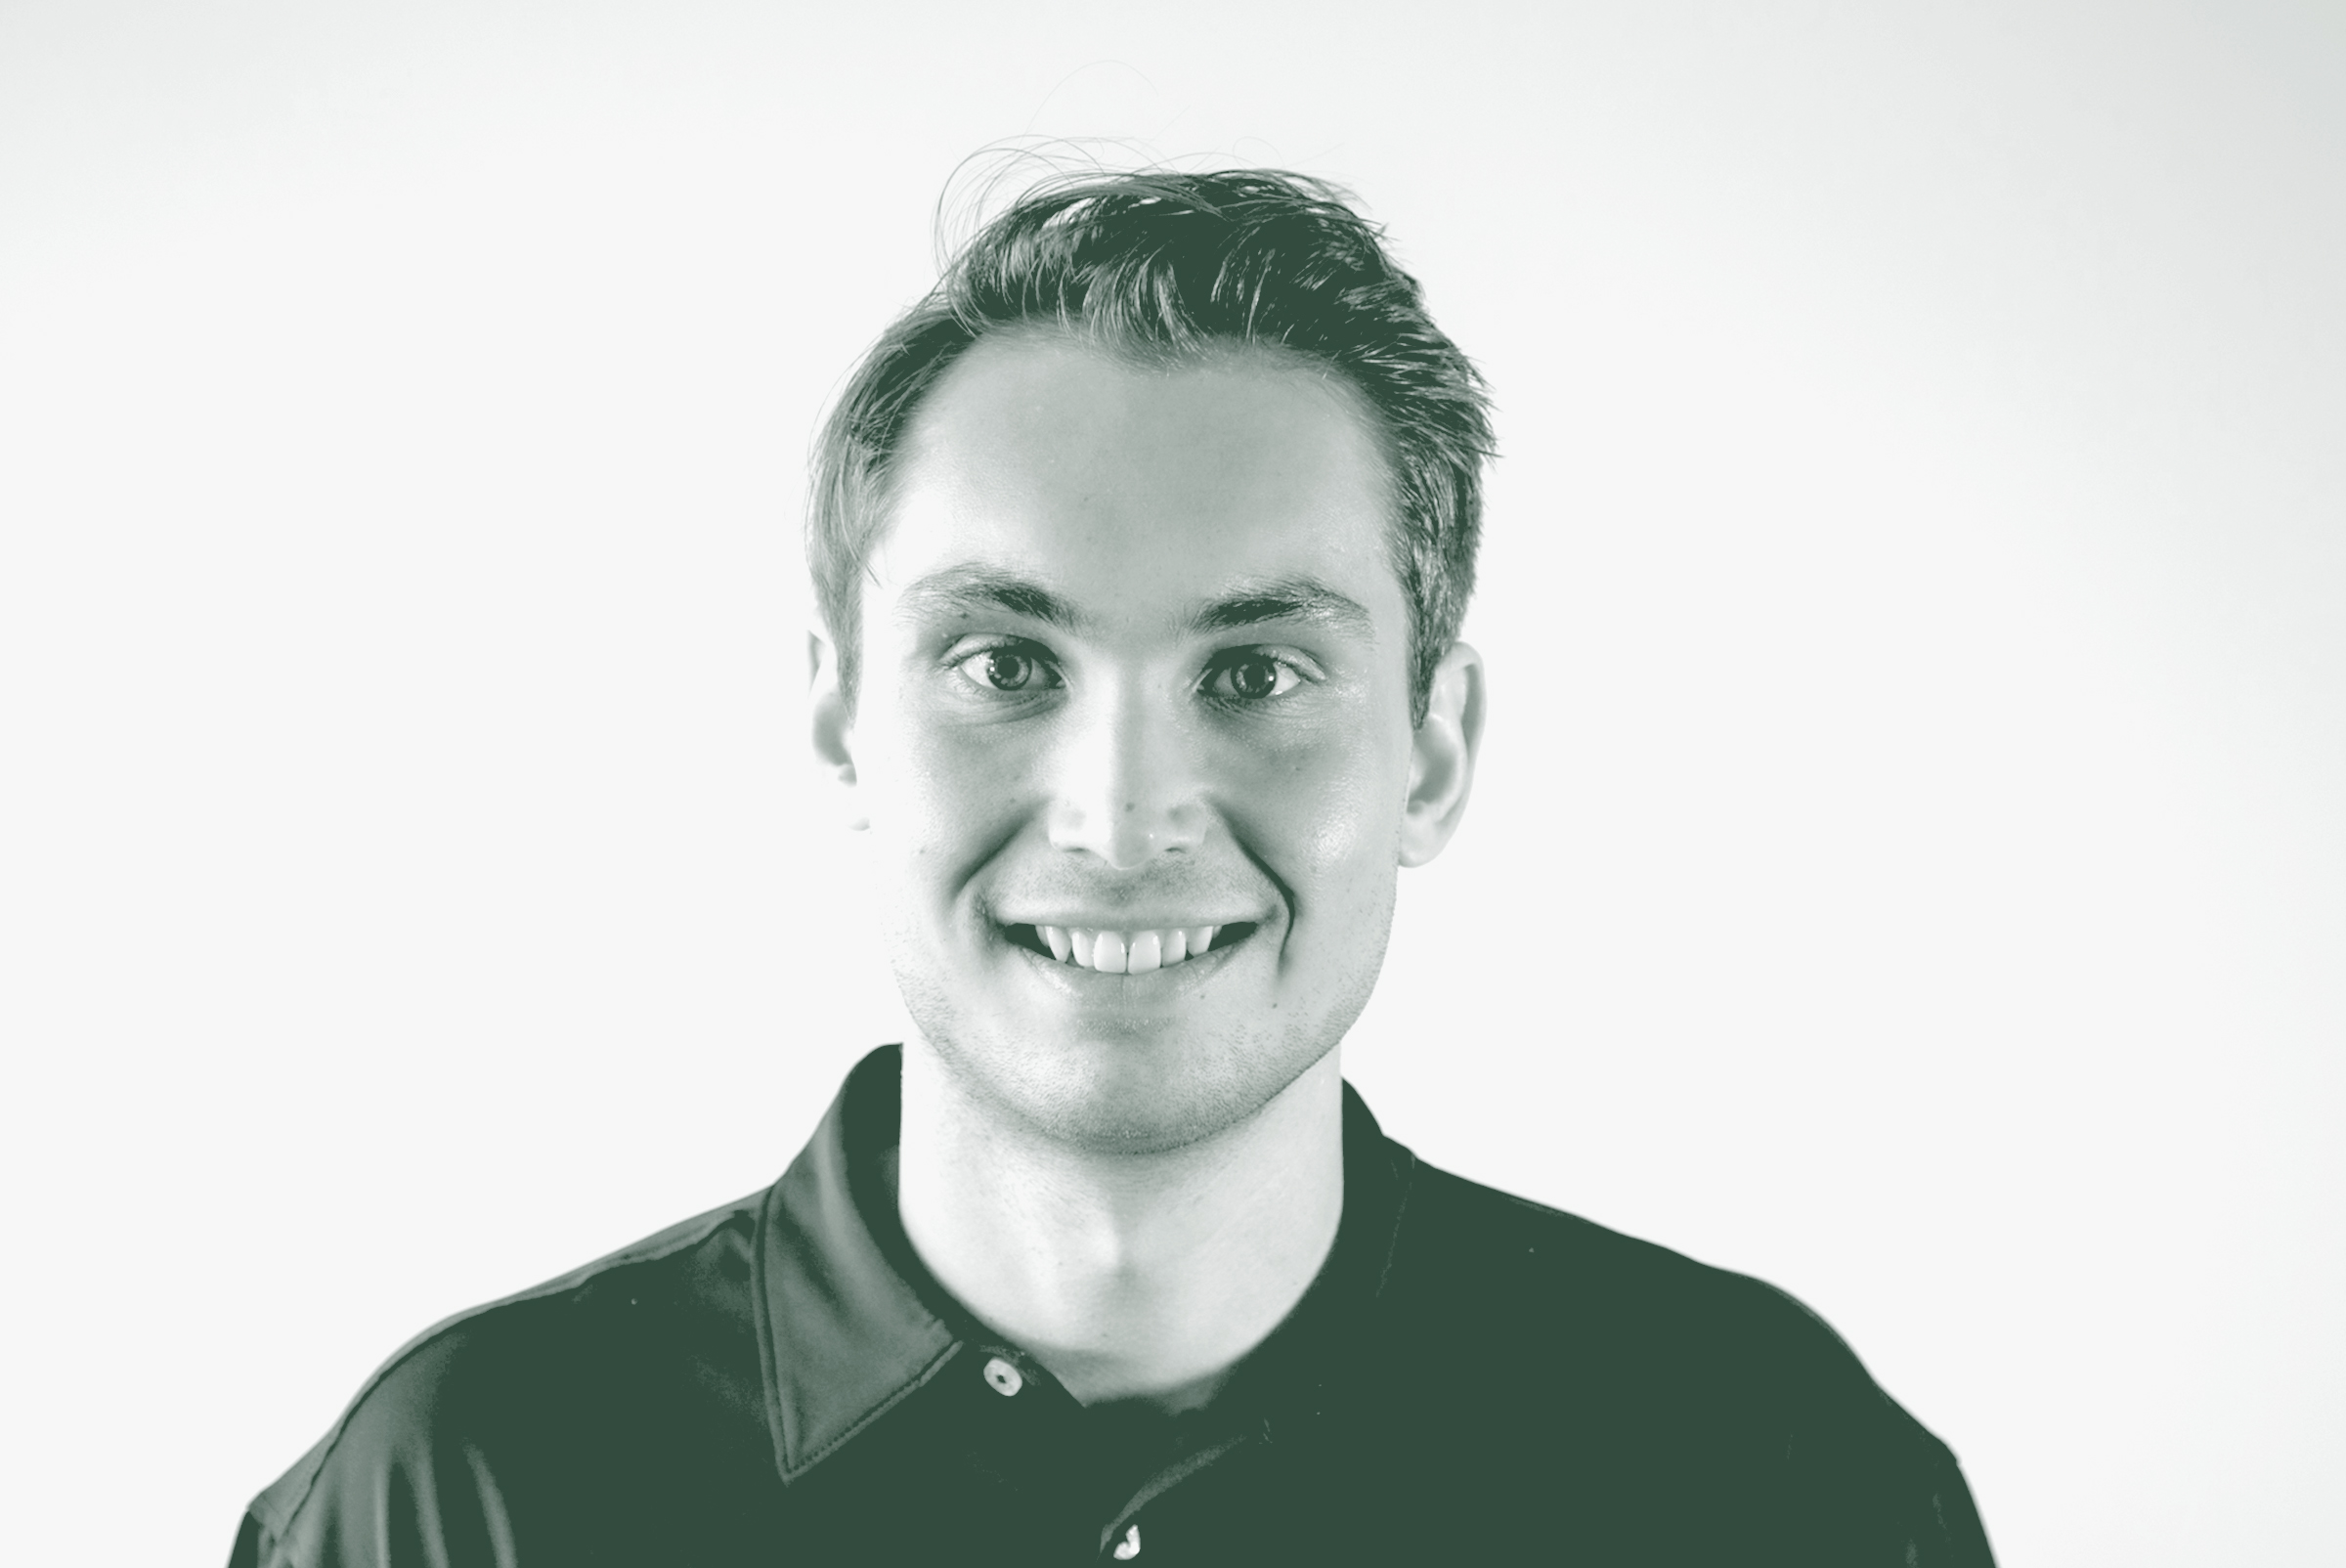 A black and white portrait of Carson Guy, a Project Coordinator with GFF in the Corporate / Office Studio, in front of a white background.